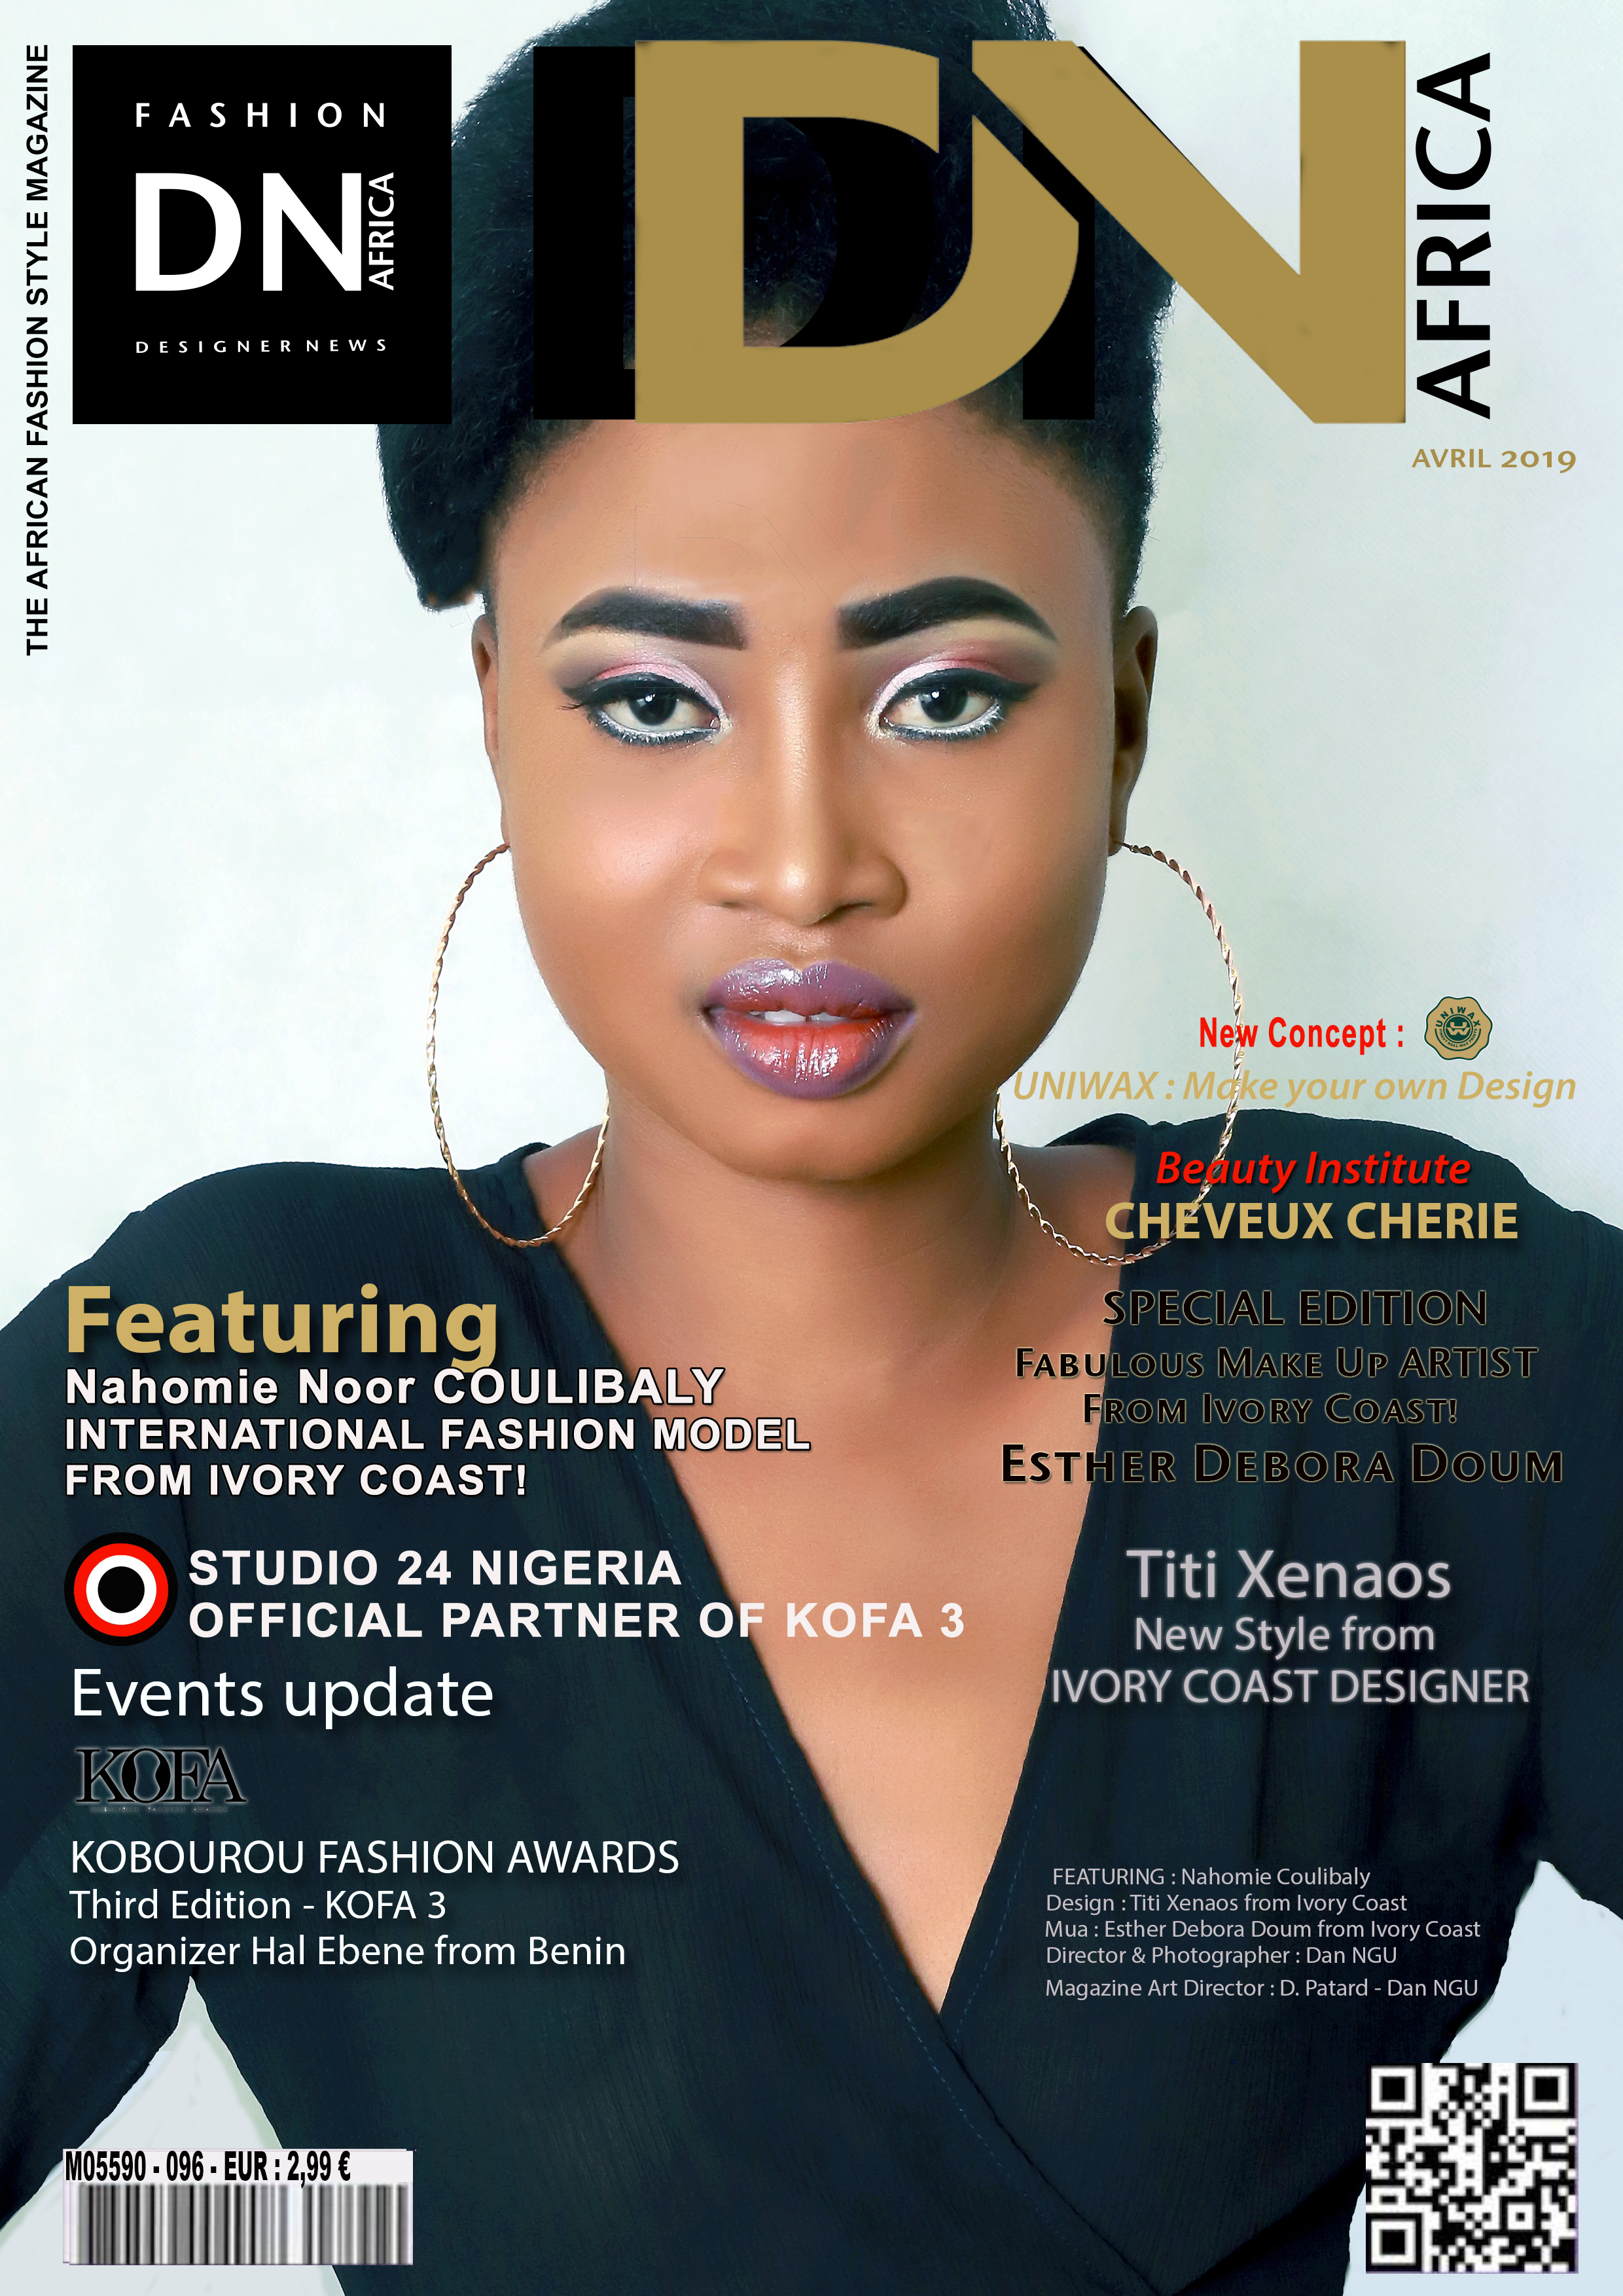 AFRICAN FASHION STYLE MAGAZINE - may 2019 COVER - Nahomie Noor COULIBALY - Official Media Partner DN AFRICA - STUDIO 24 NIGERIA - STUDIO 24 INTERNATIONAL - Ifeanyi Christopher Oputa MD AND CEO OF COLVI LIMITED AND STUDIO 24 - CHEVEUX CHERIE and CHEVEUX CHERIE STUDIO BY MARIEME DUBOZ- Fashion Editor Nahomie NOOR COULIBALY